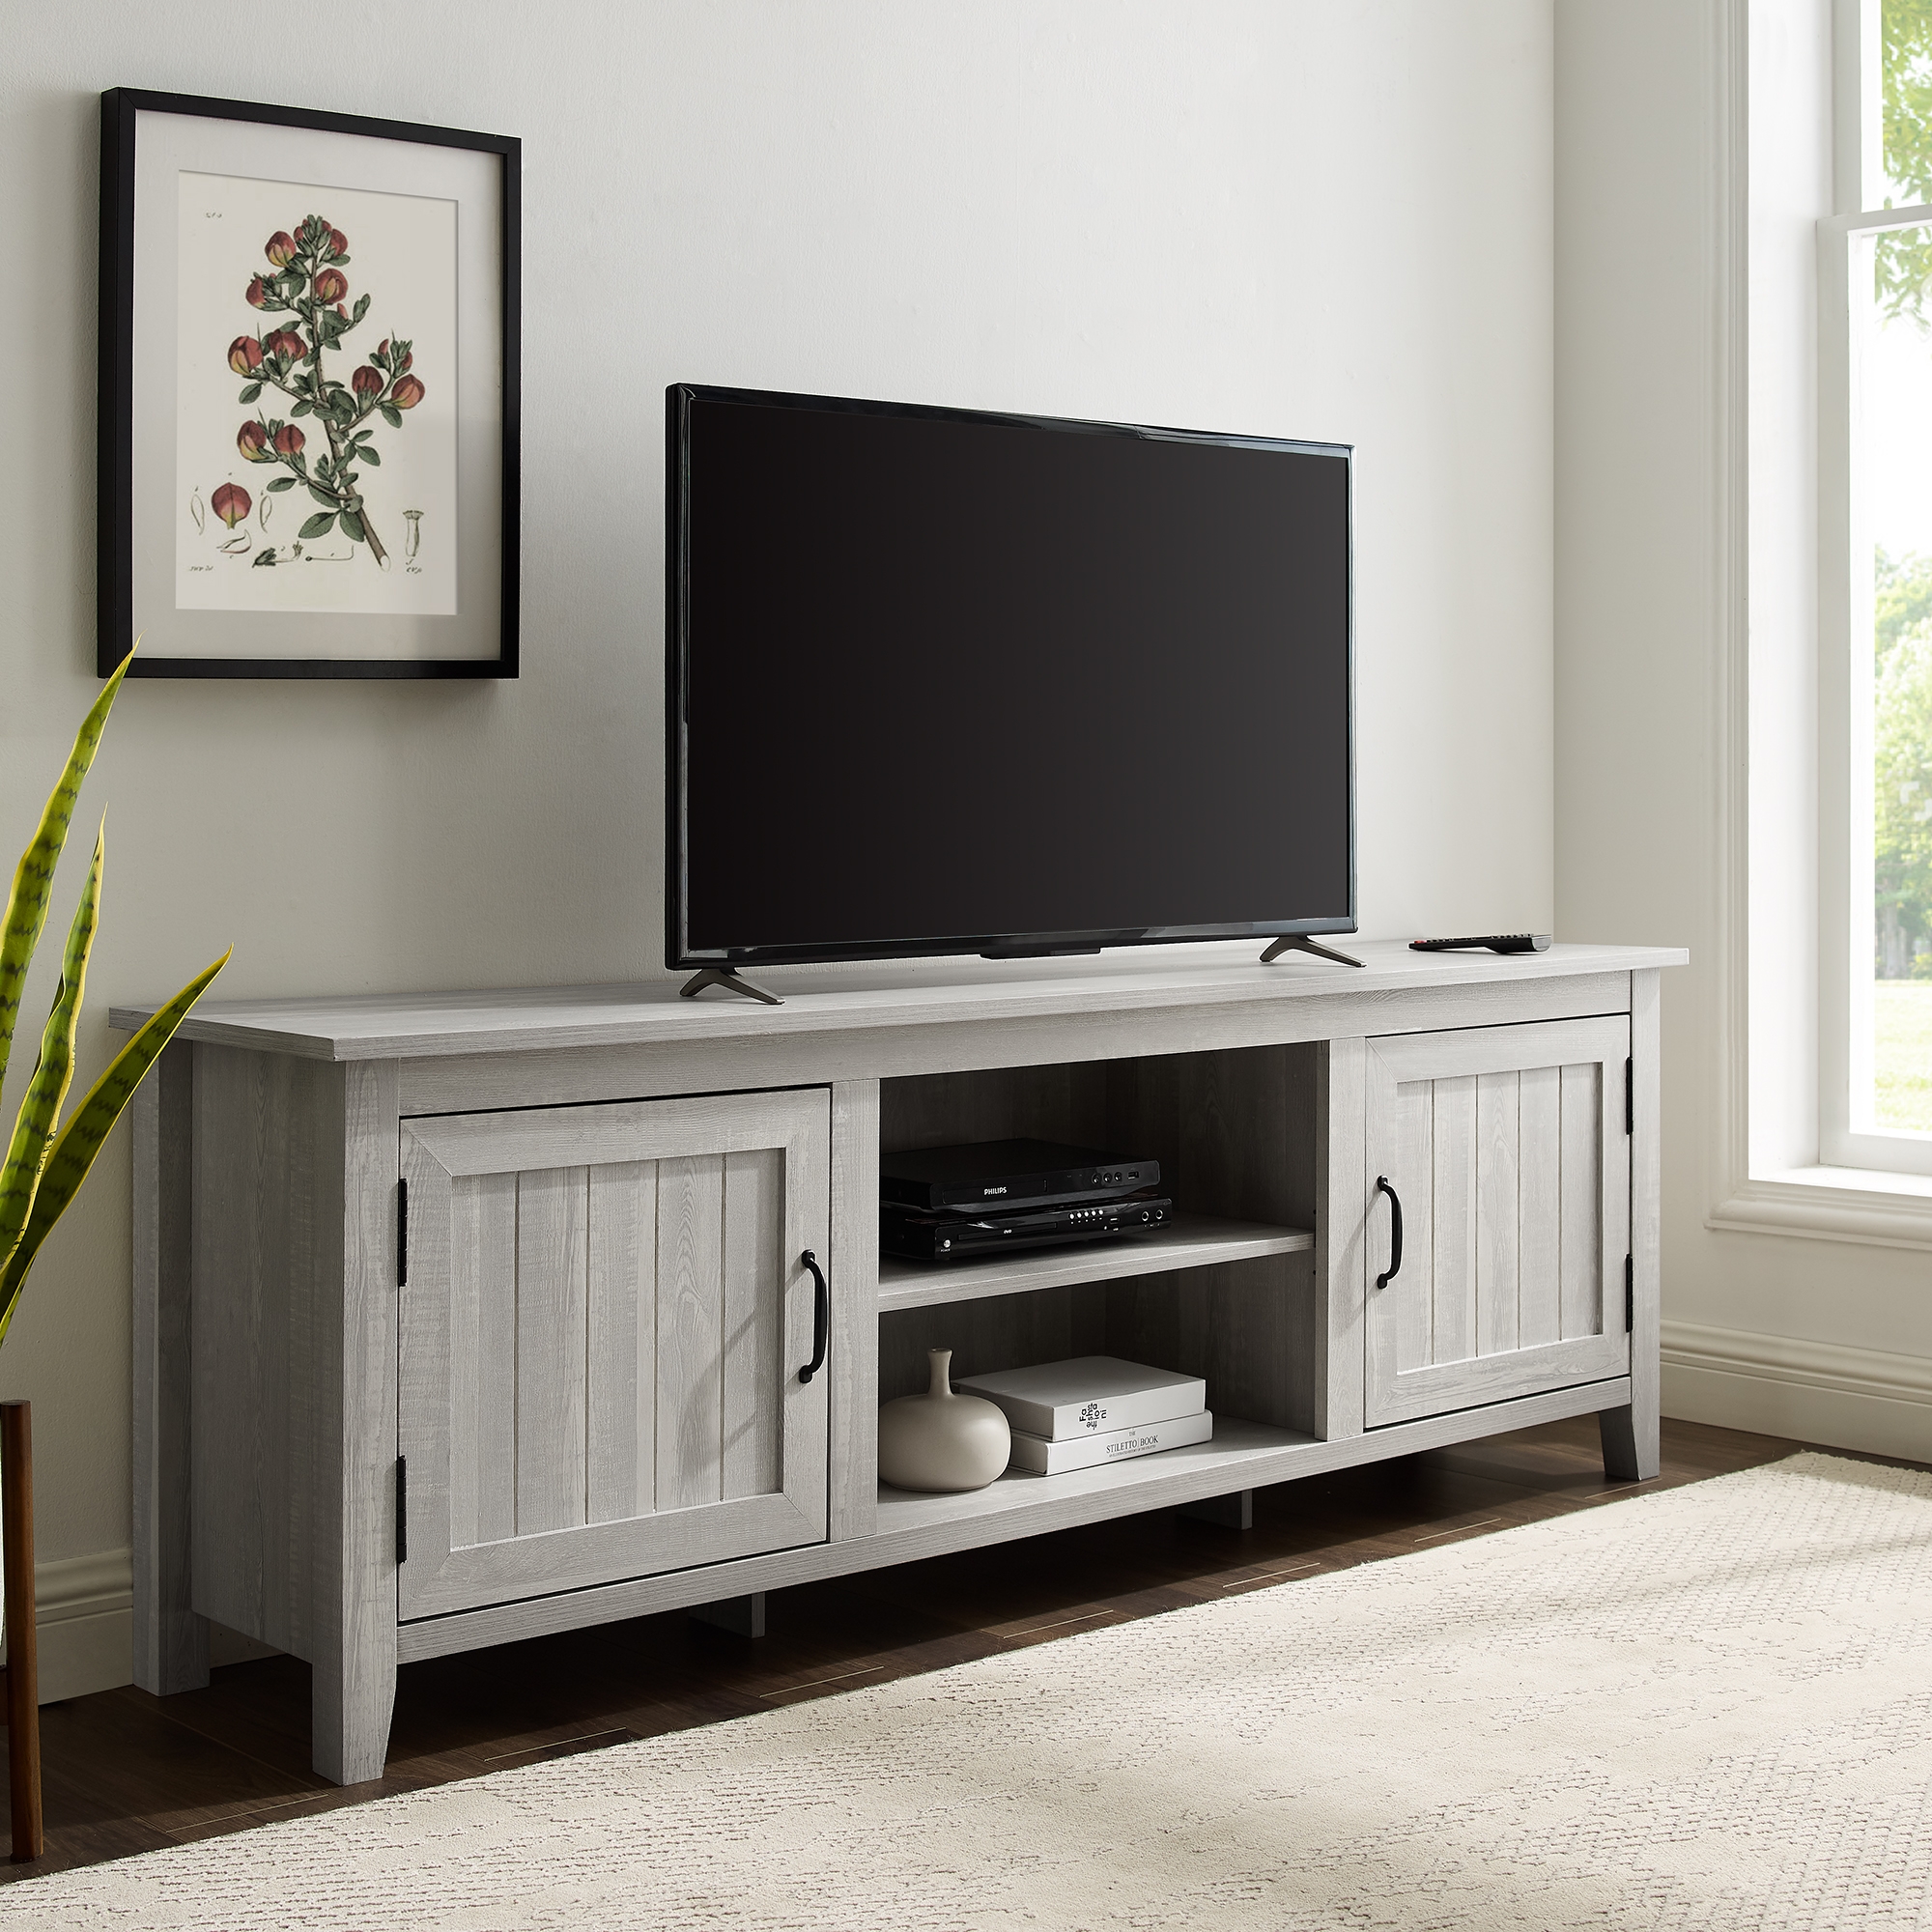 70" Modern Farmhouse Simple Grooved Door Wood TV Stand - Stone Grey - Image 4